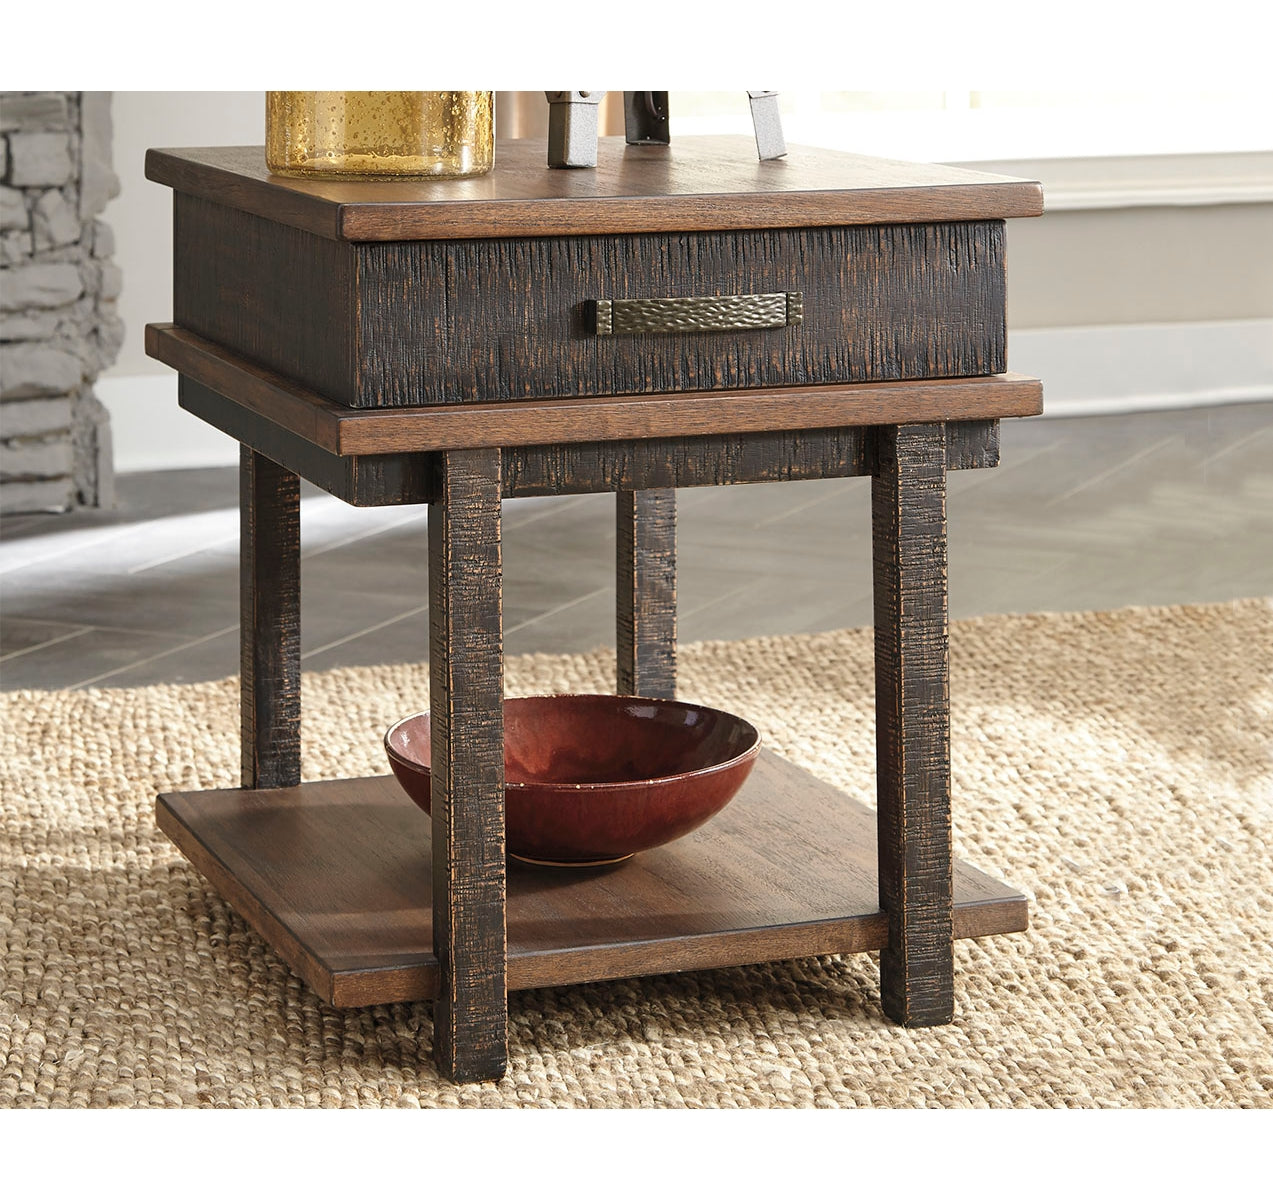 Stanah End Table